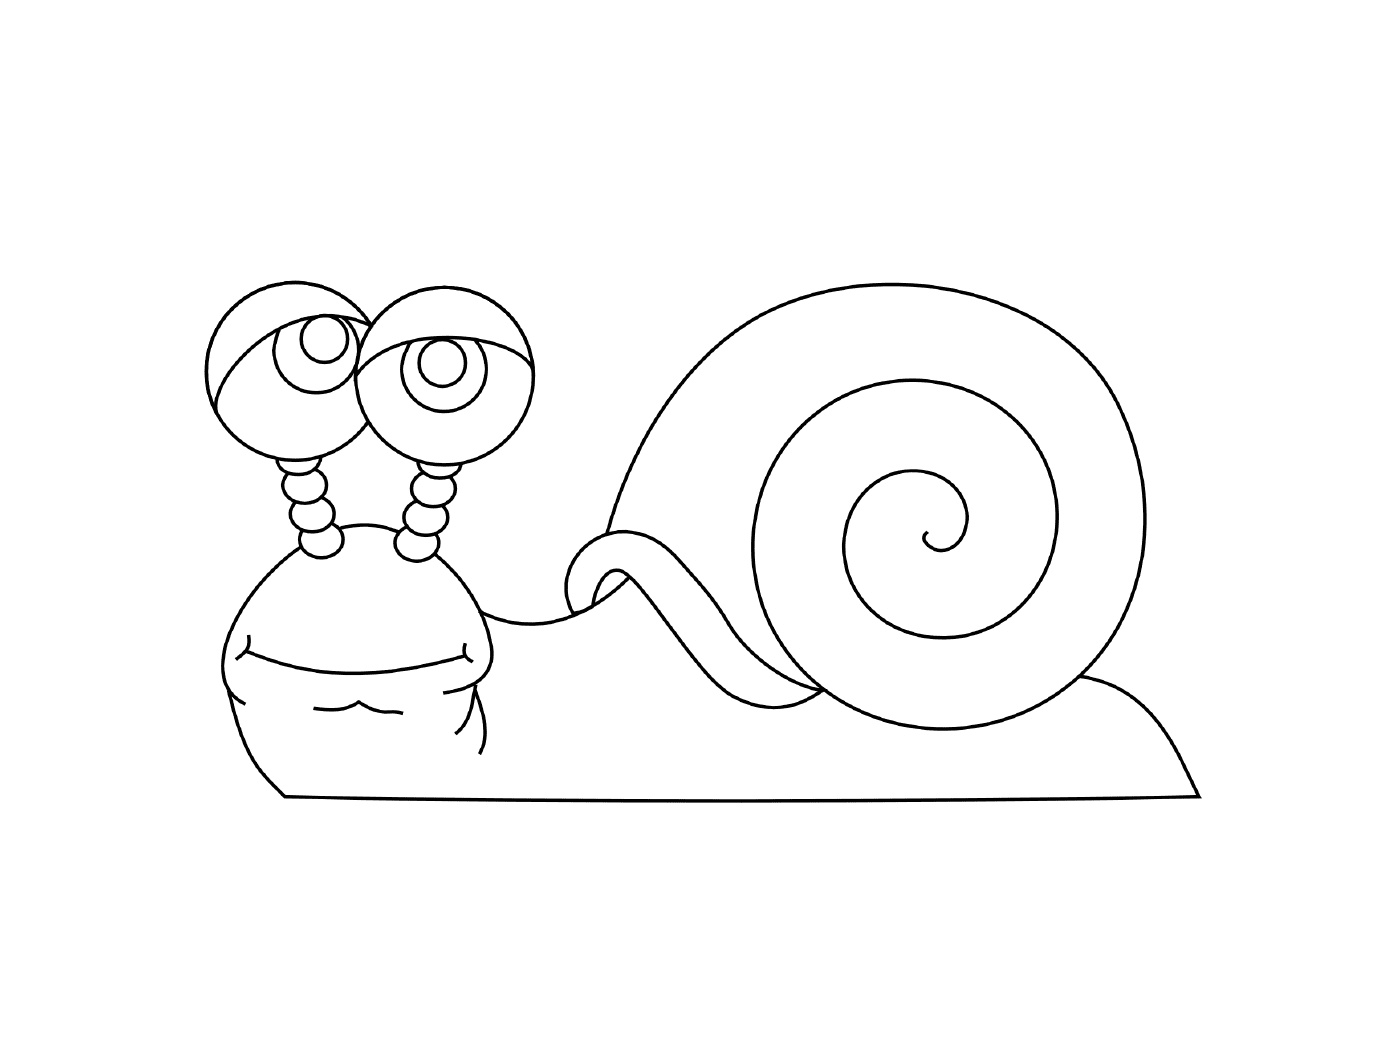  Snail that needs to rest 